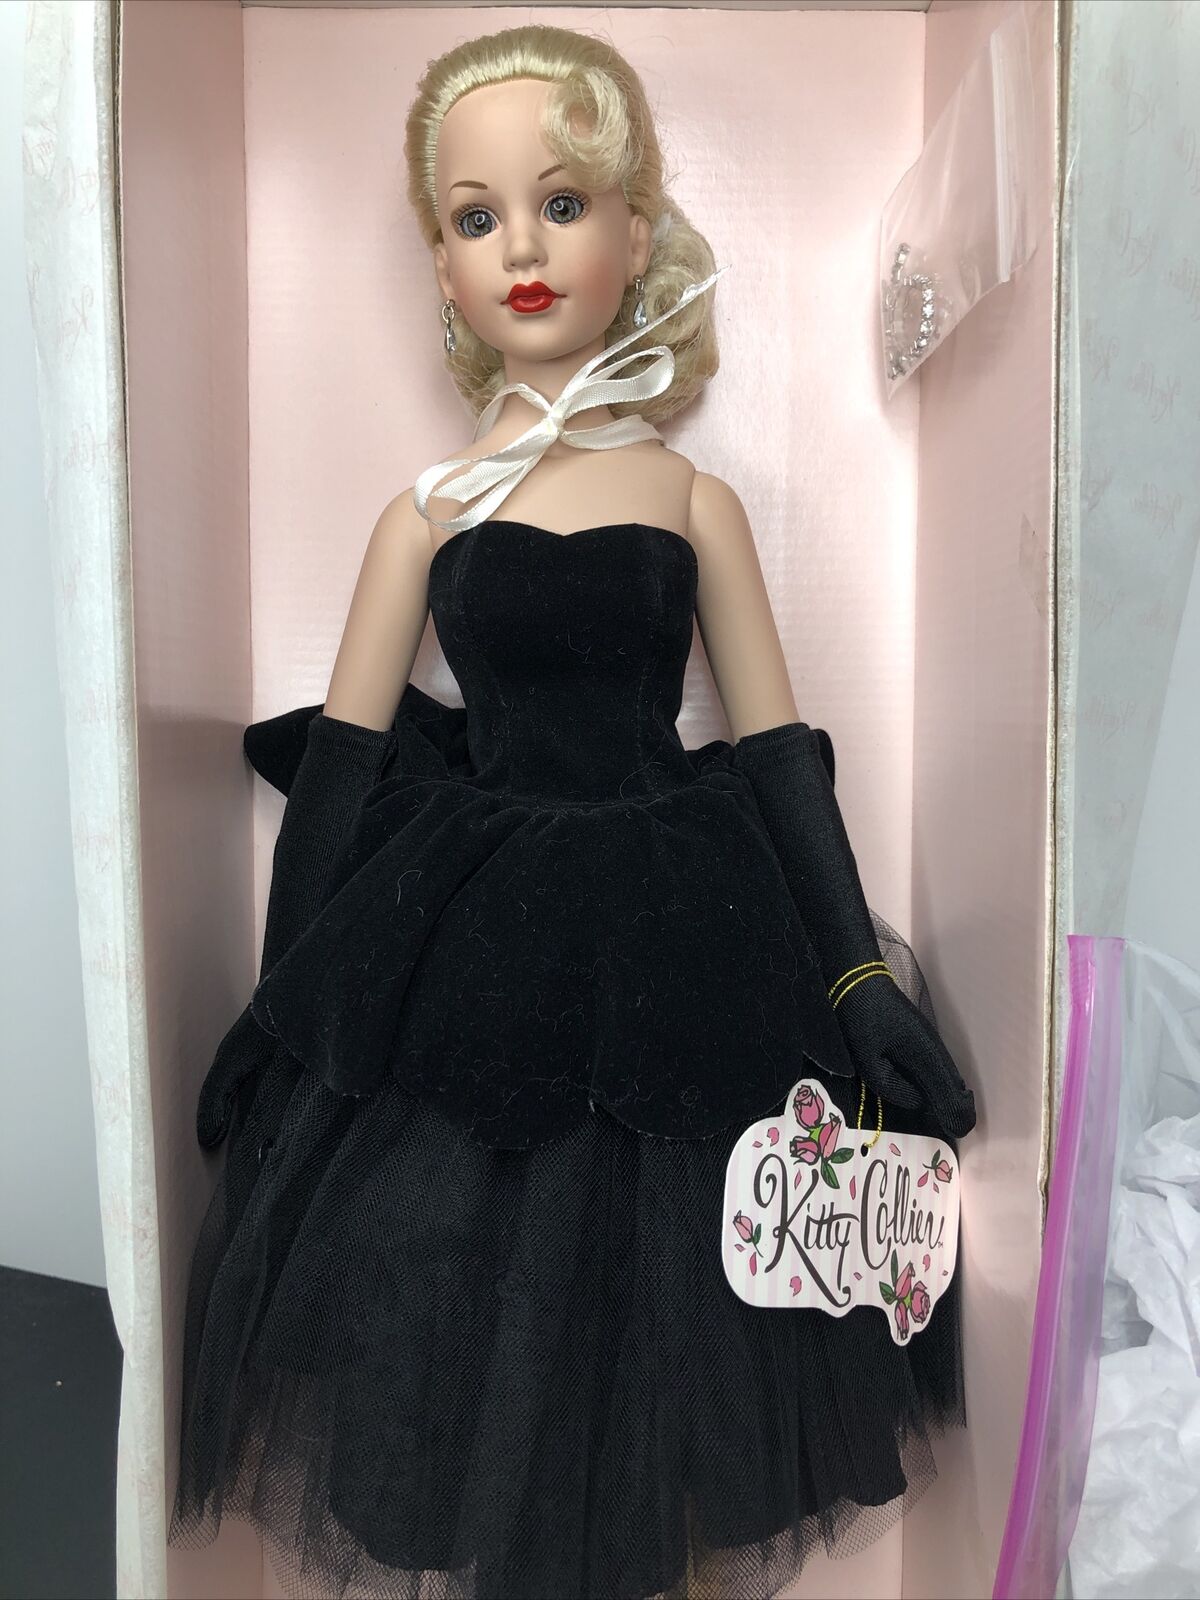 18” Tonner Kitty Collier Doll “femme Fatale” Gorgeous Blonde Cocktail Dress Mib